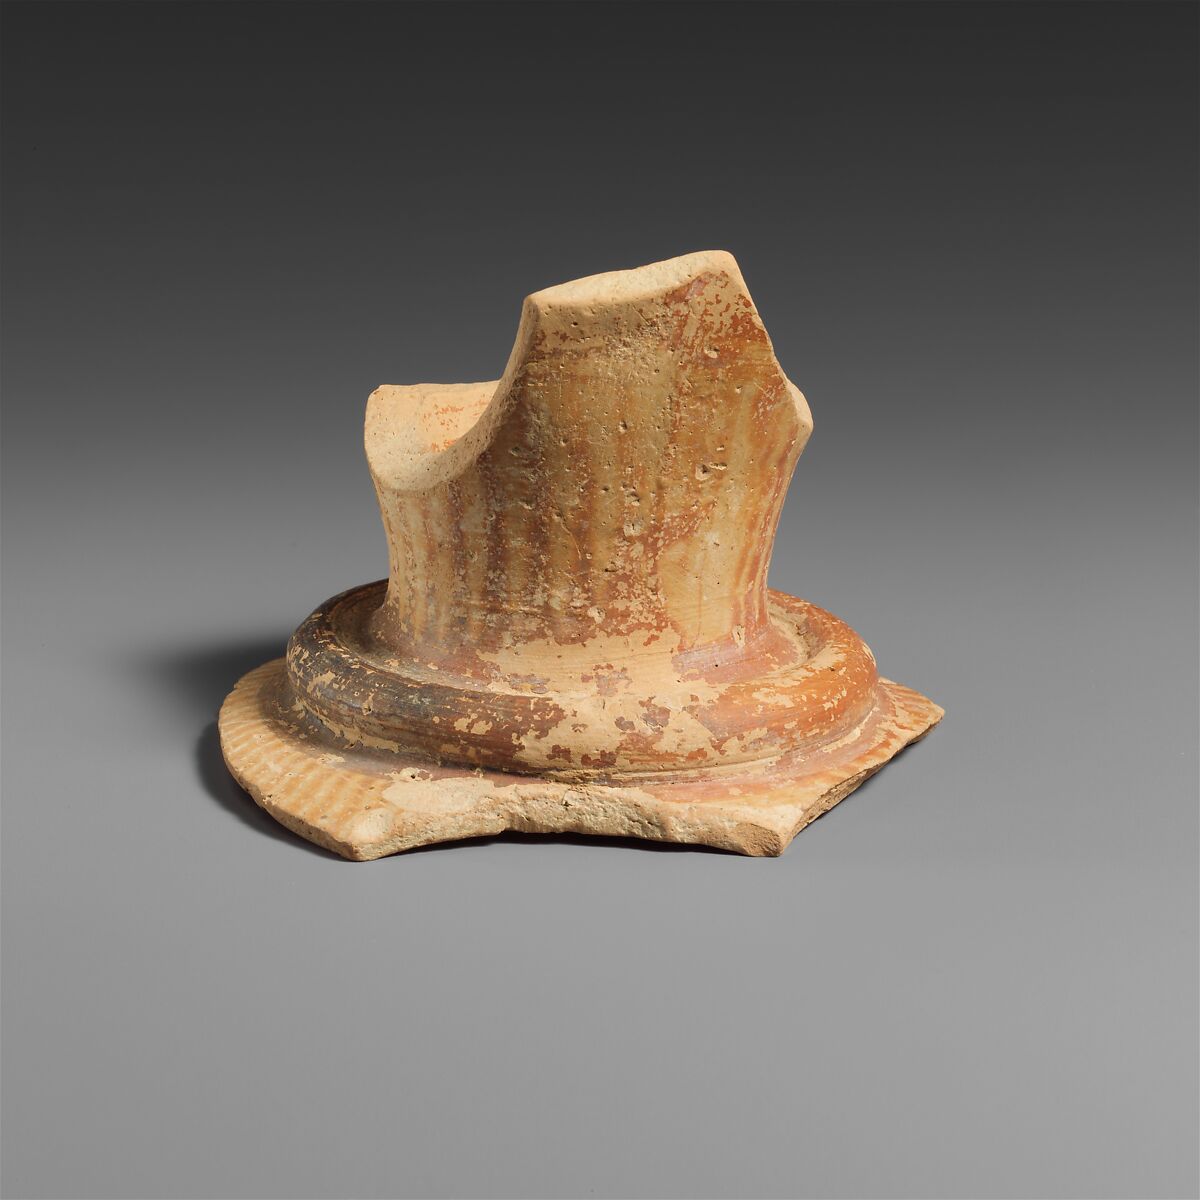 Terracotta sherd from the mouth of a vase with neck ridge, Terracotta, Minoan 